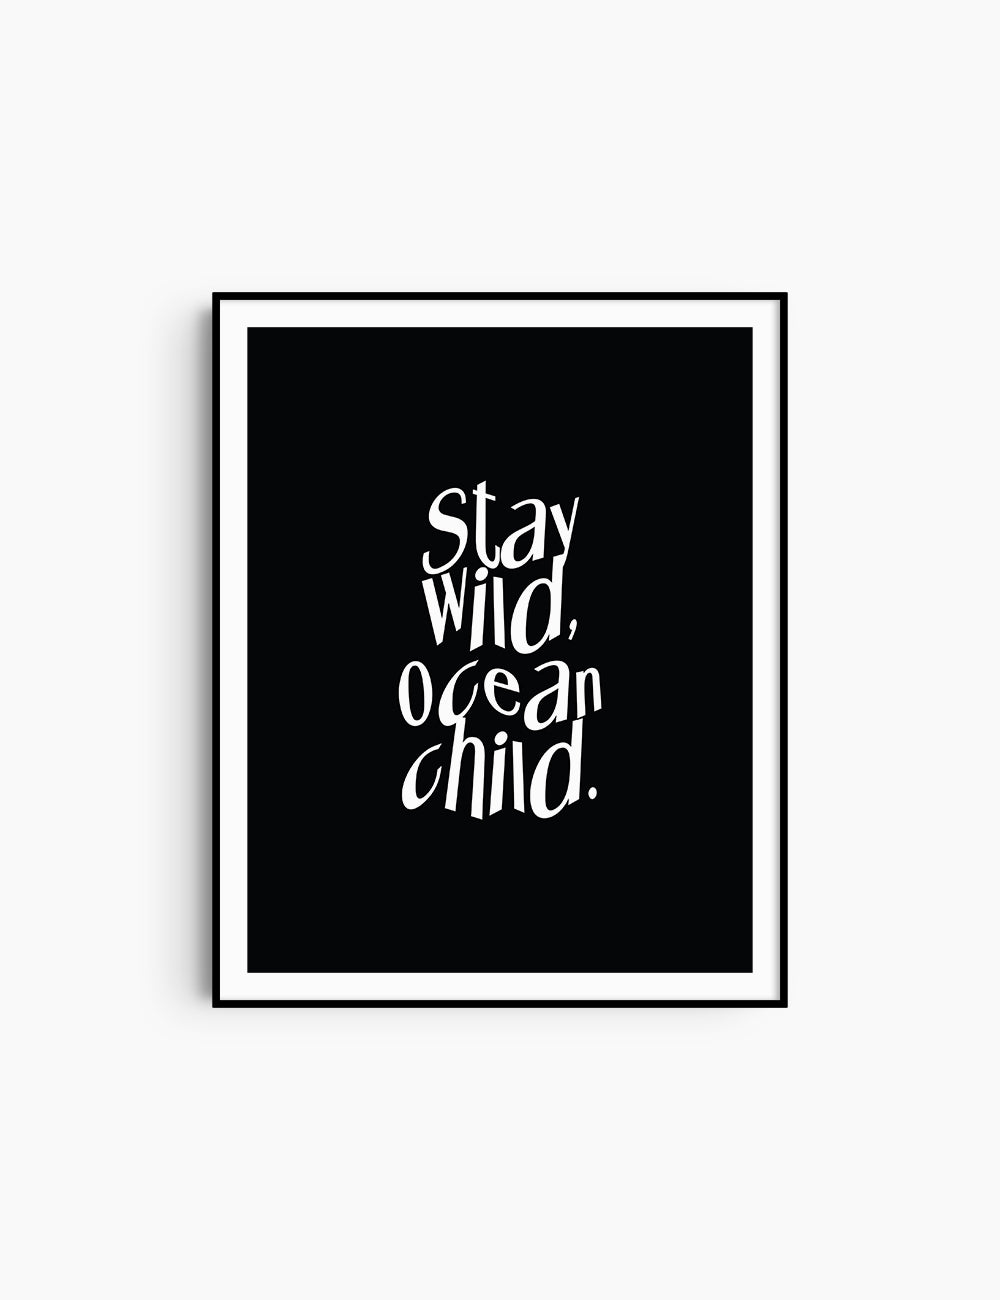 STAY WILD, OCEAN CHILD. Black and White. Printable Wall Art Quote.